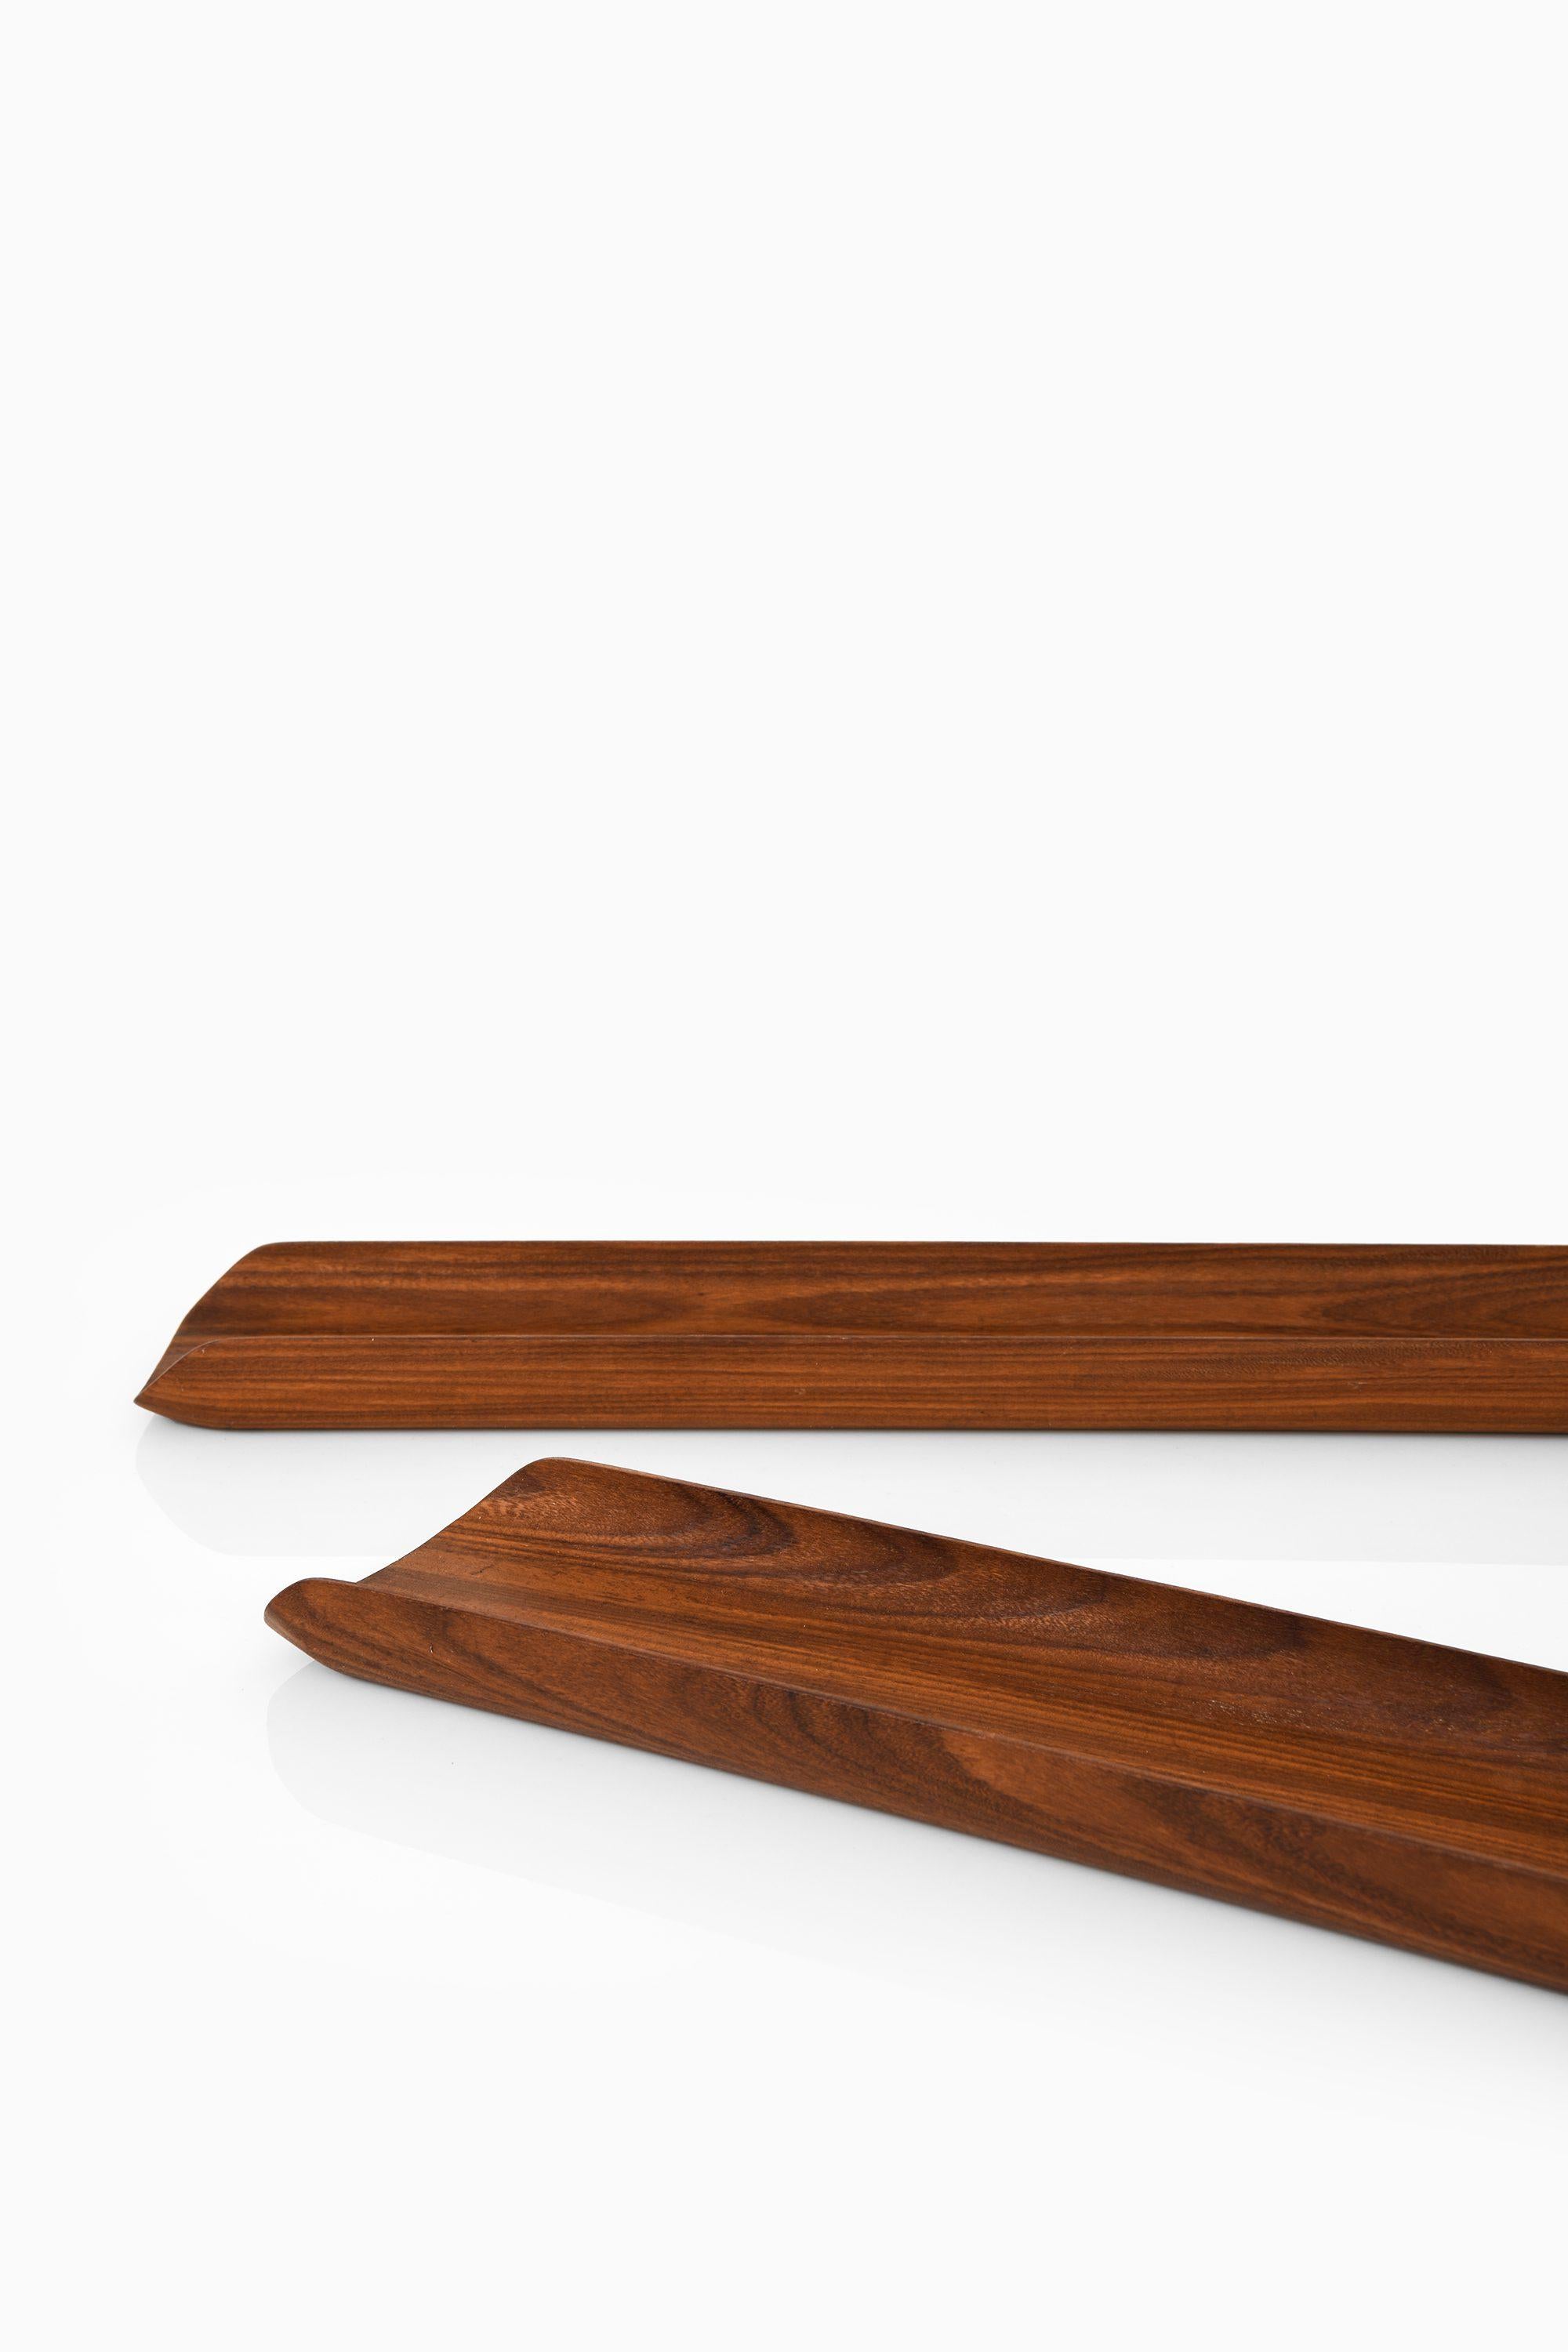 Swedish Pair of Trays in Teak By Johnny Mattsson, 1960's For Sale